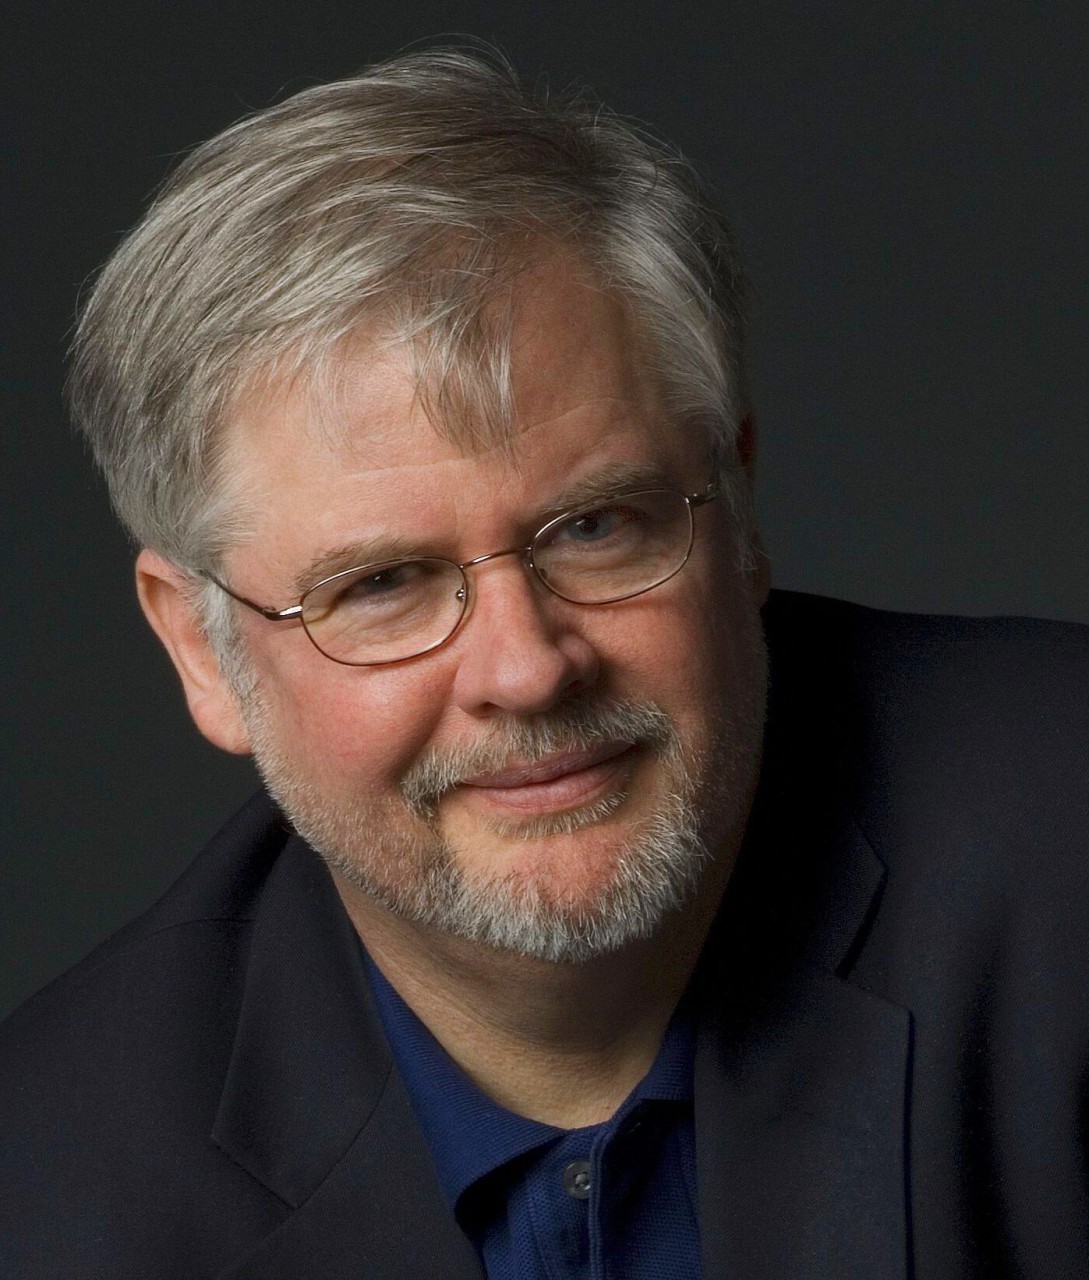 Playwright Christopher Durang's "Vanya and Sonia and Masha and Spike" was a 2013 Tony Award winner for Best Play. (Courtesy)